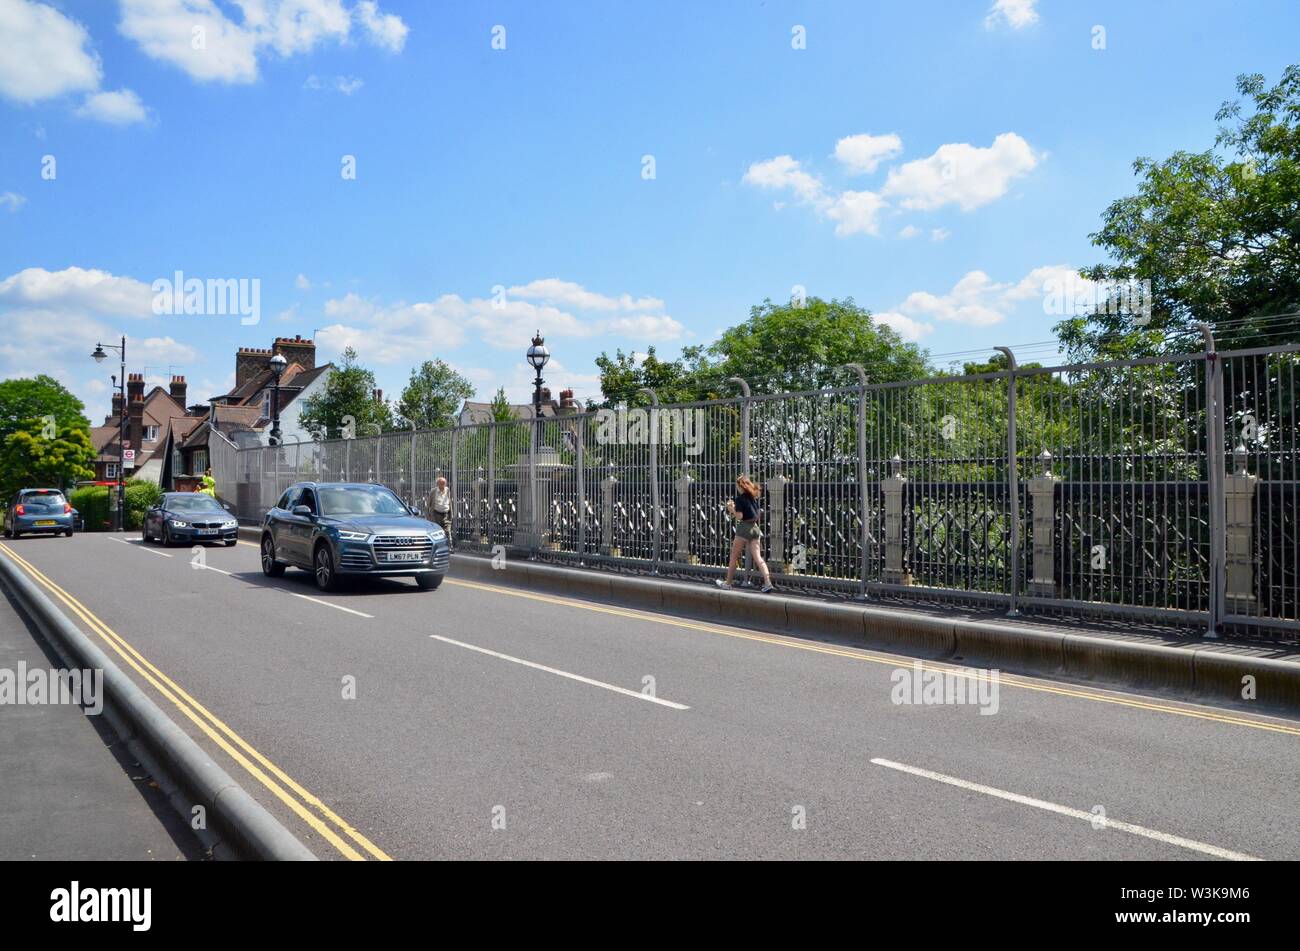 newly erected fencing at archway road bridge attempts to prevent suicides N19 london notorious suicide hot spot Stock Photo